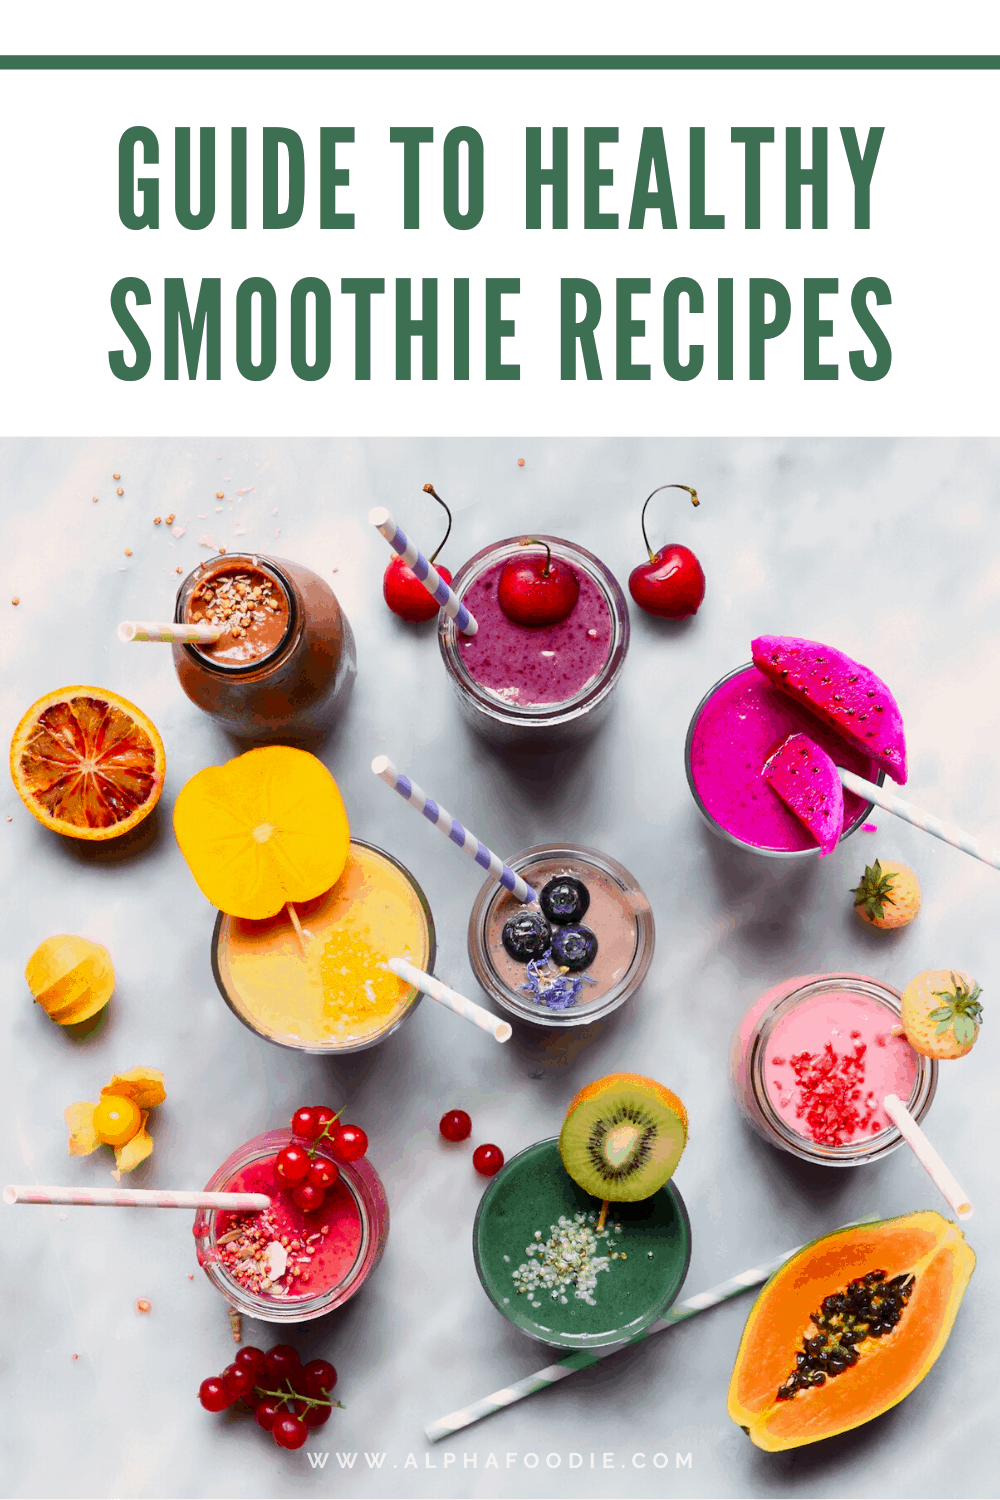 Guide to Healthy Smoothie Recipes